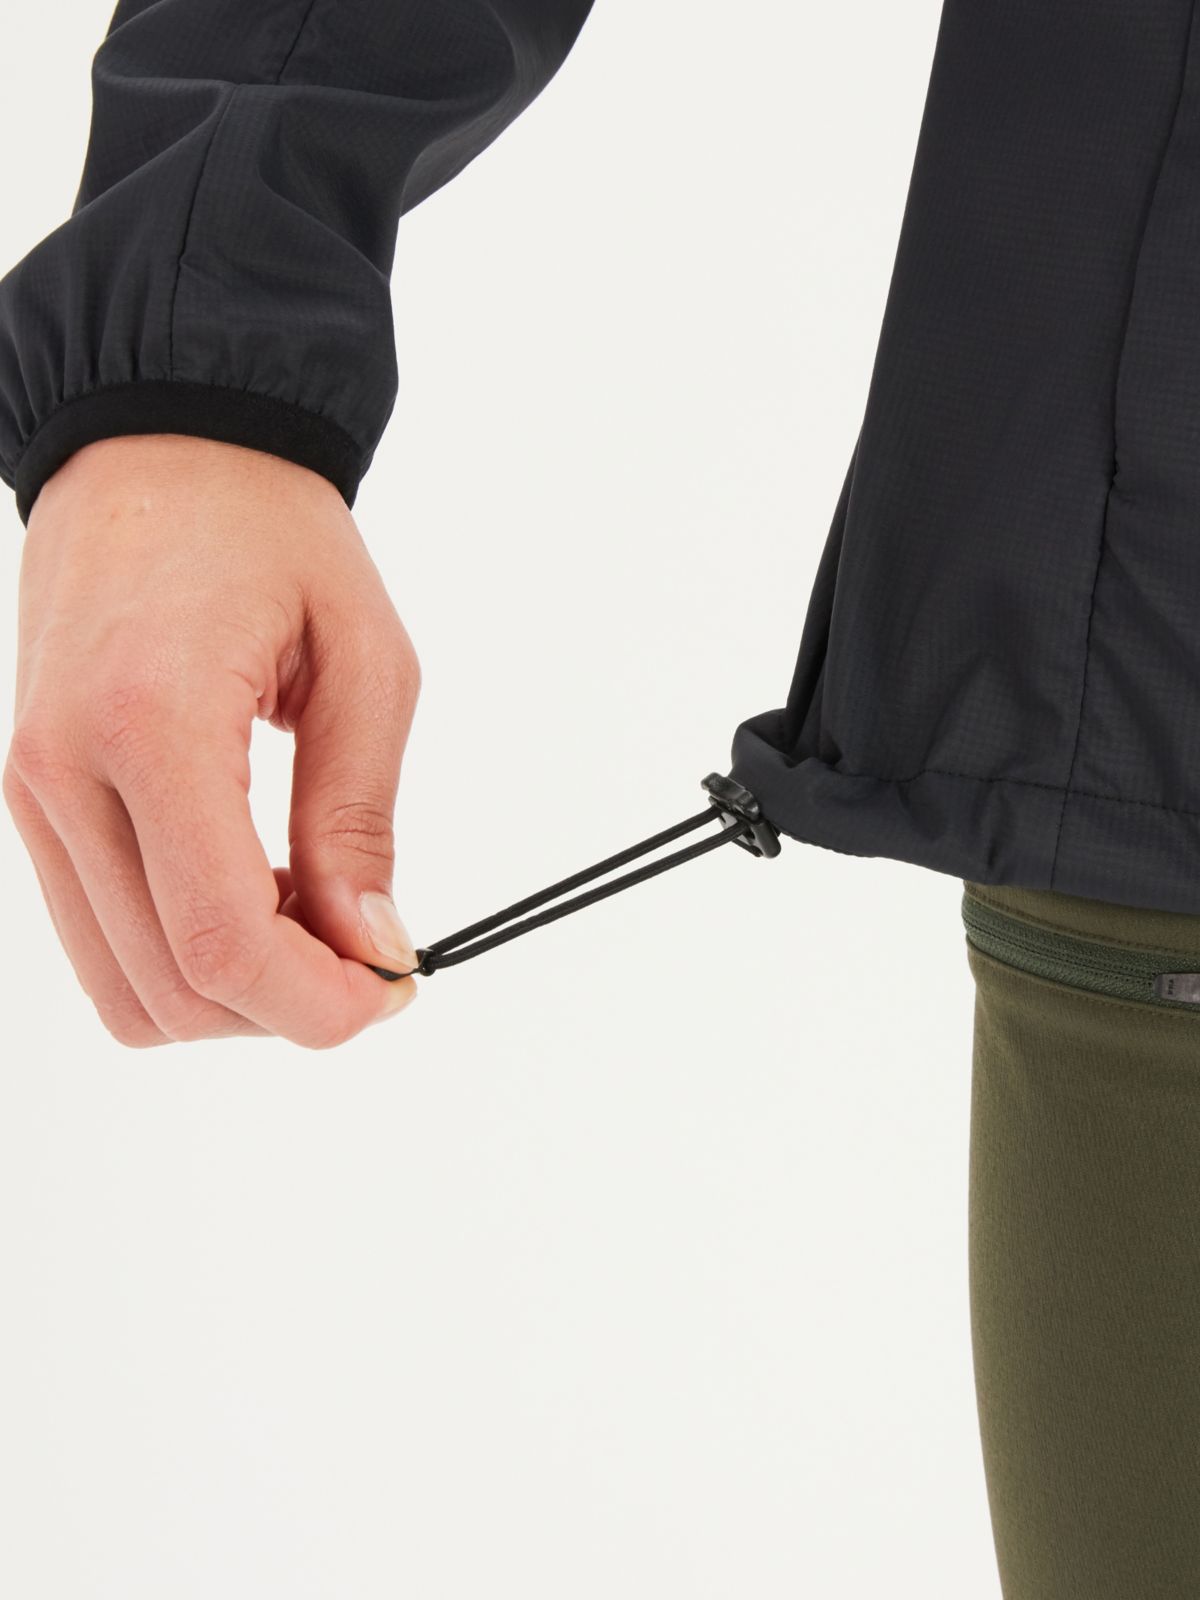 nylon tie for jacket to prevent wind entering